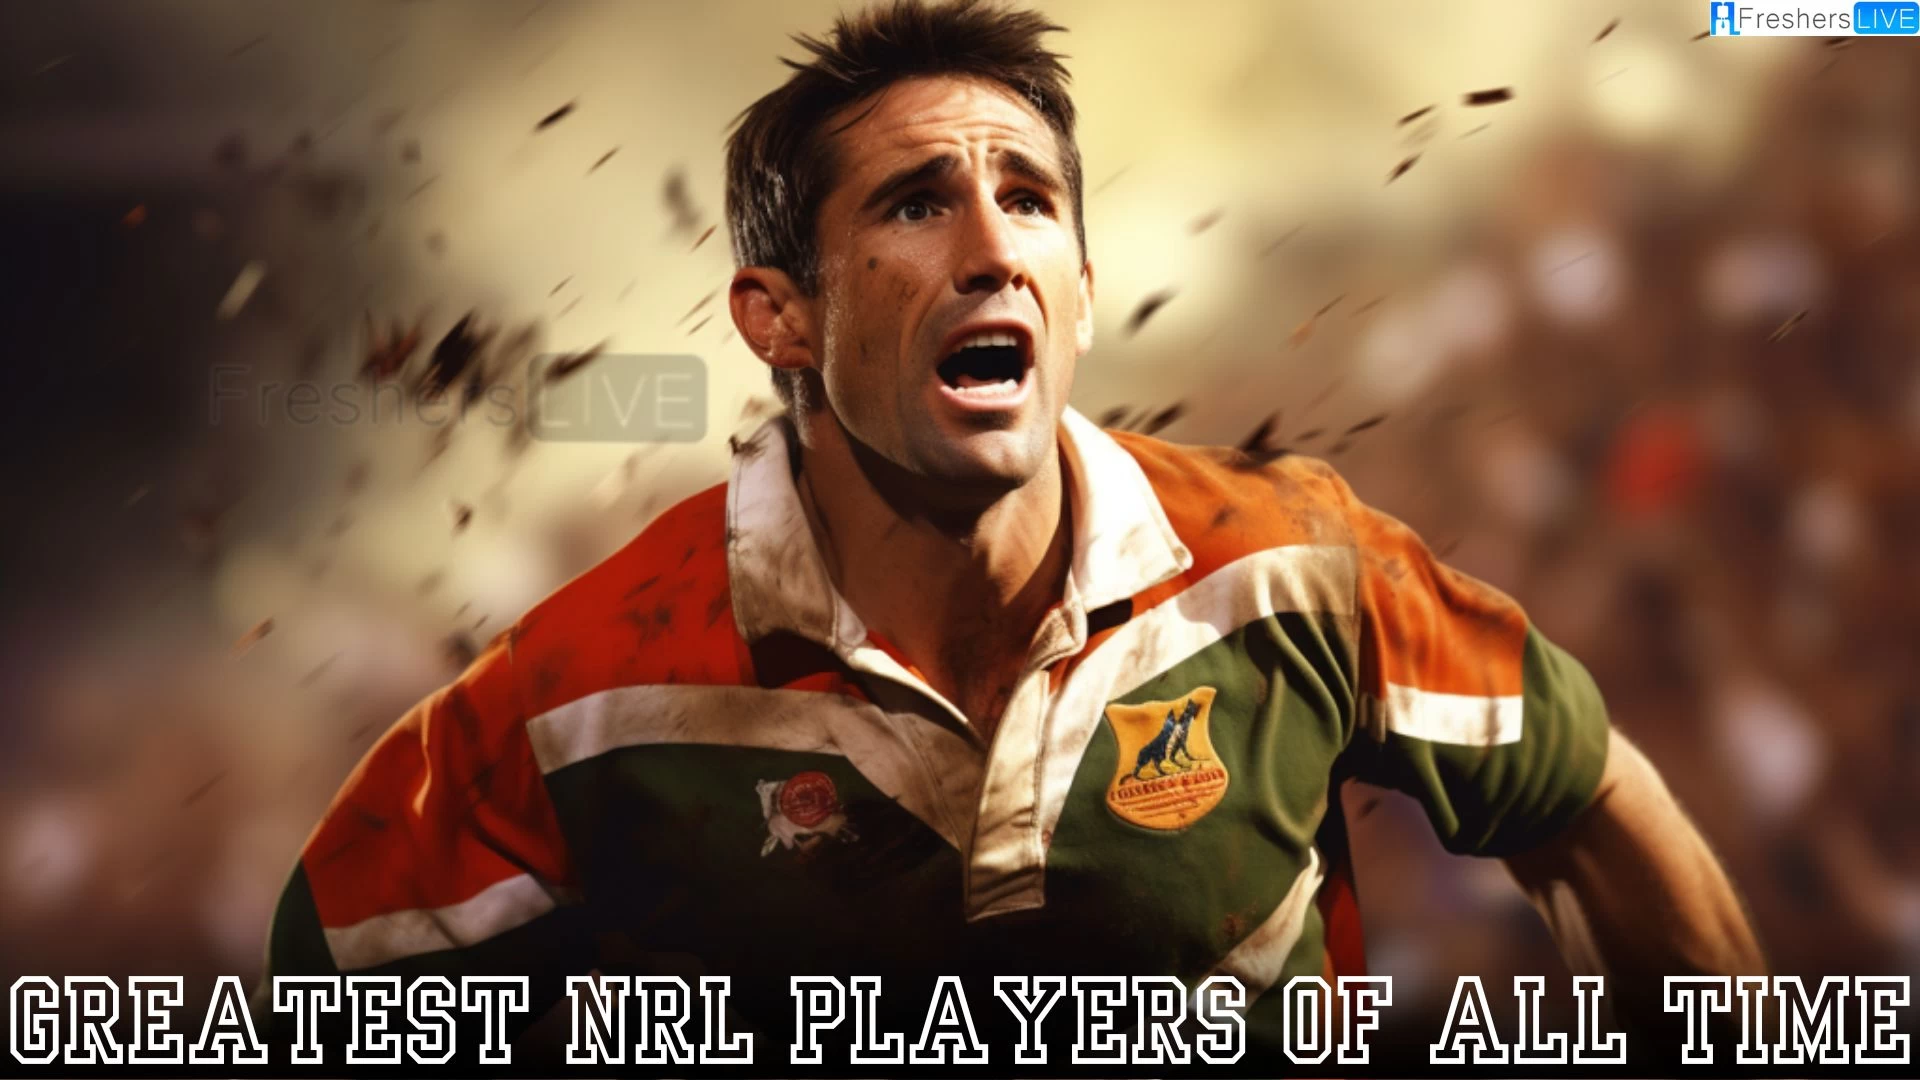 Greatest NRL Players of All Time - Top 10 Skill, Dedication, and Greatness